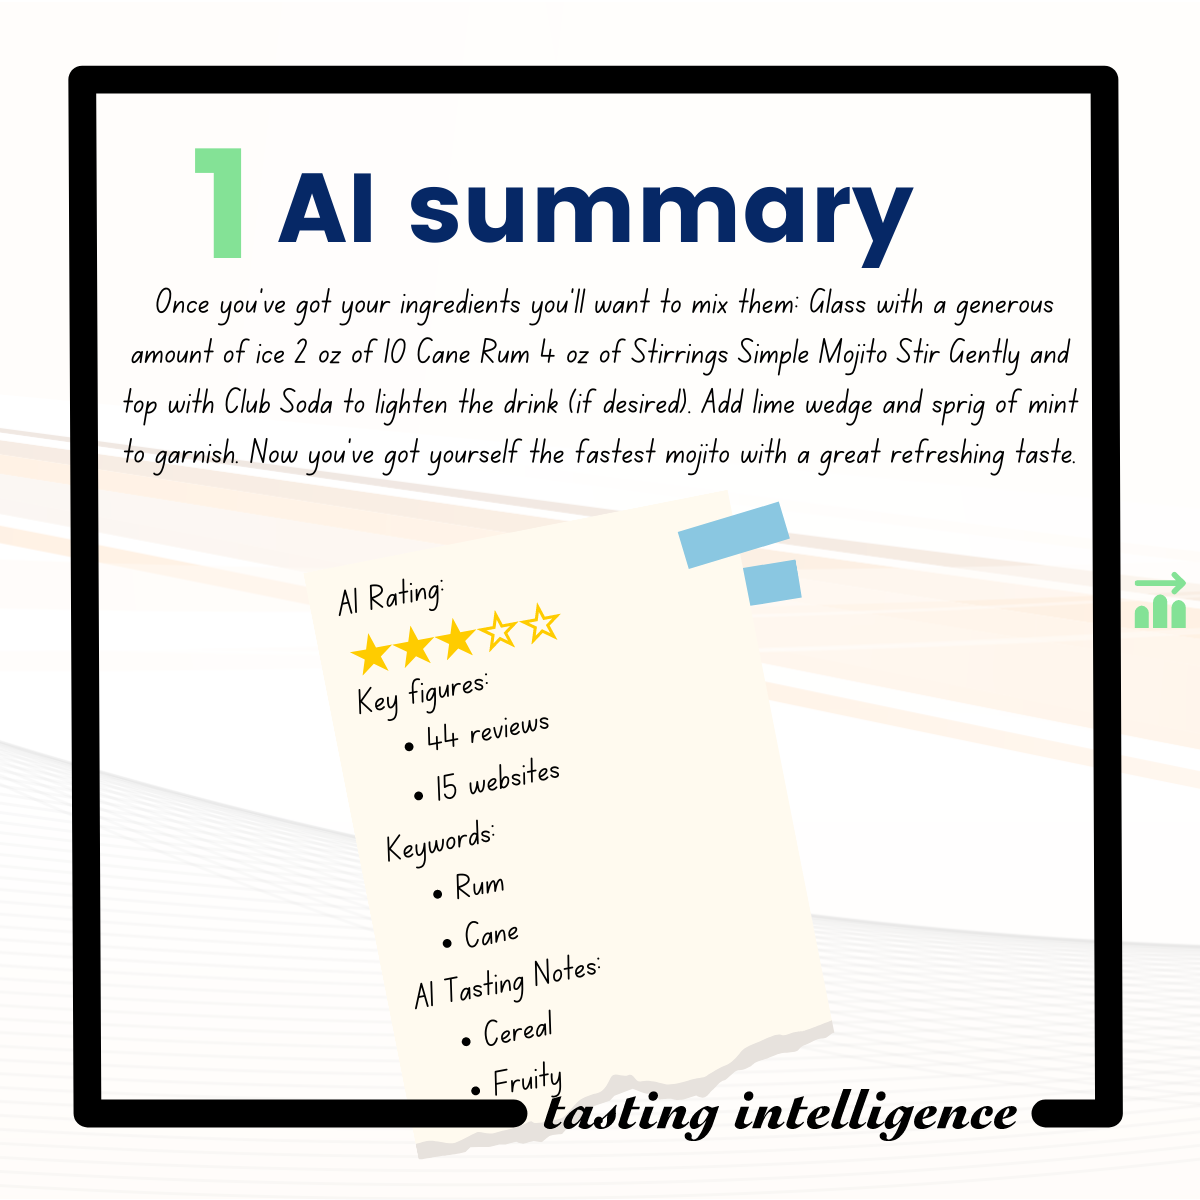 artificial intelligence summary with keywords and ai rating